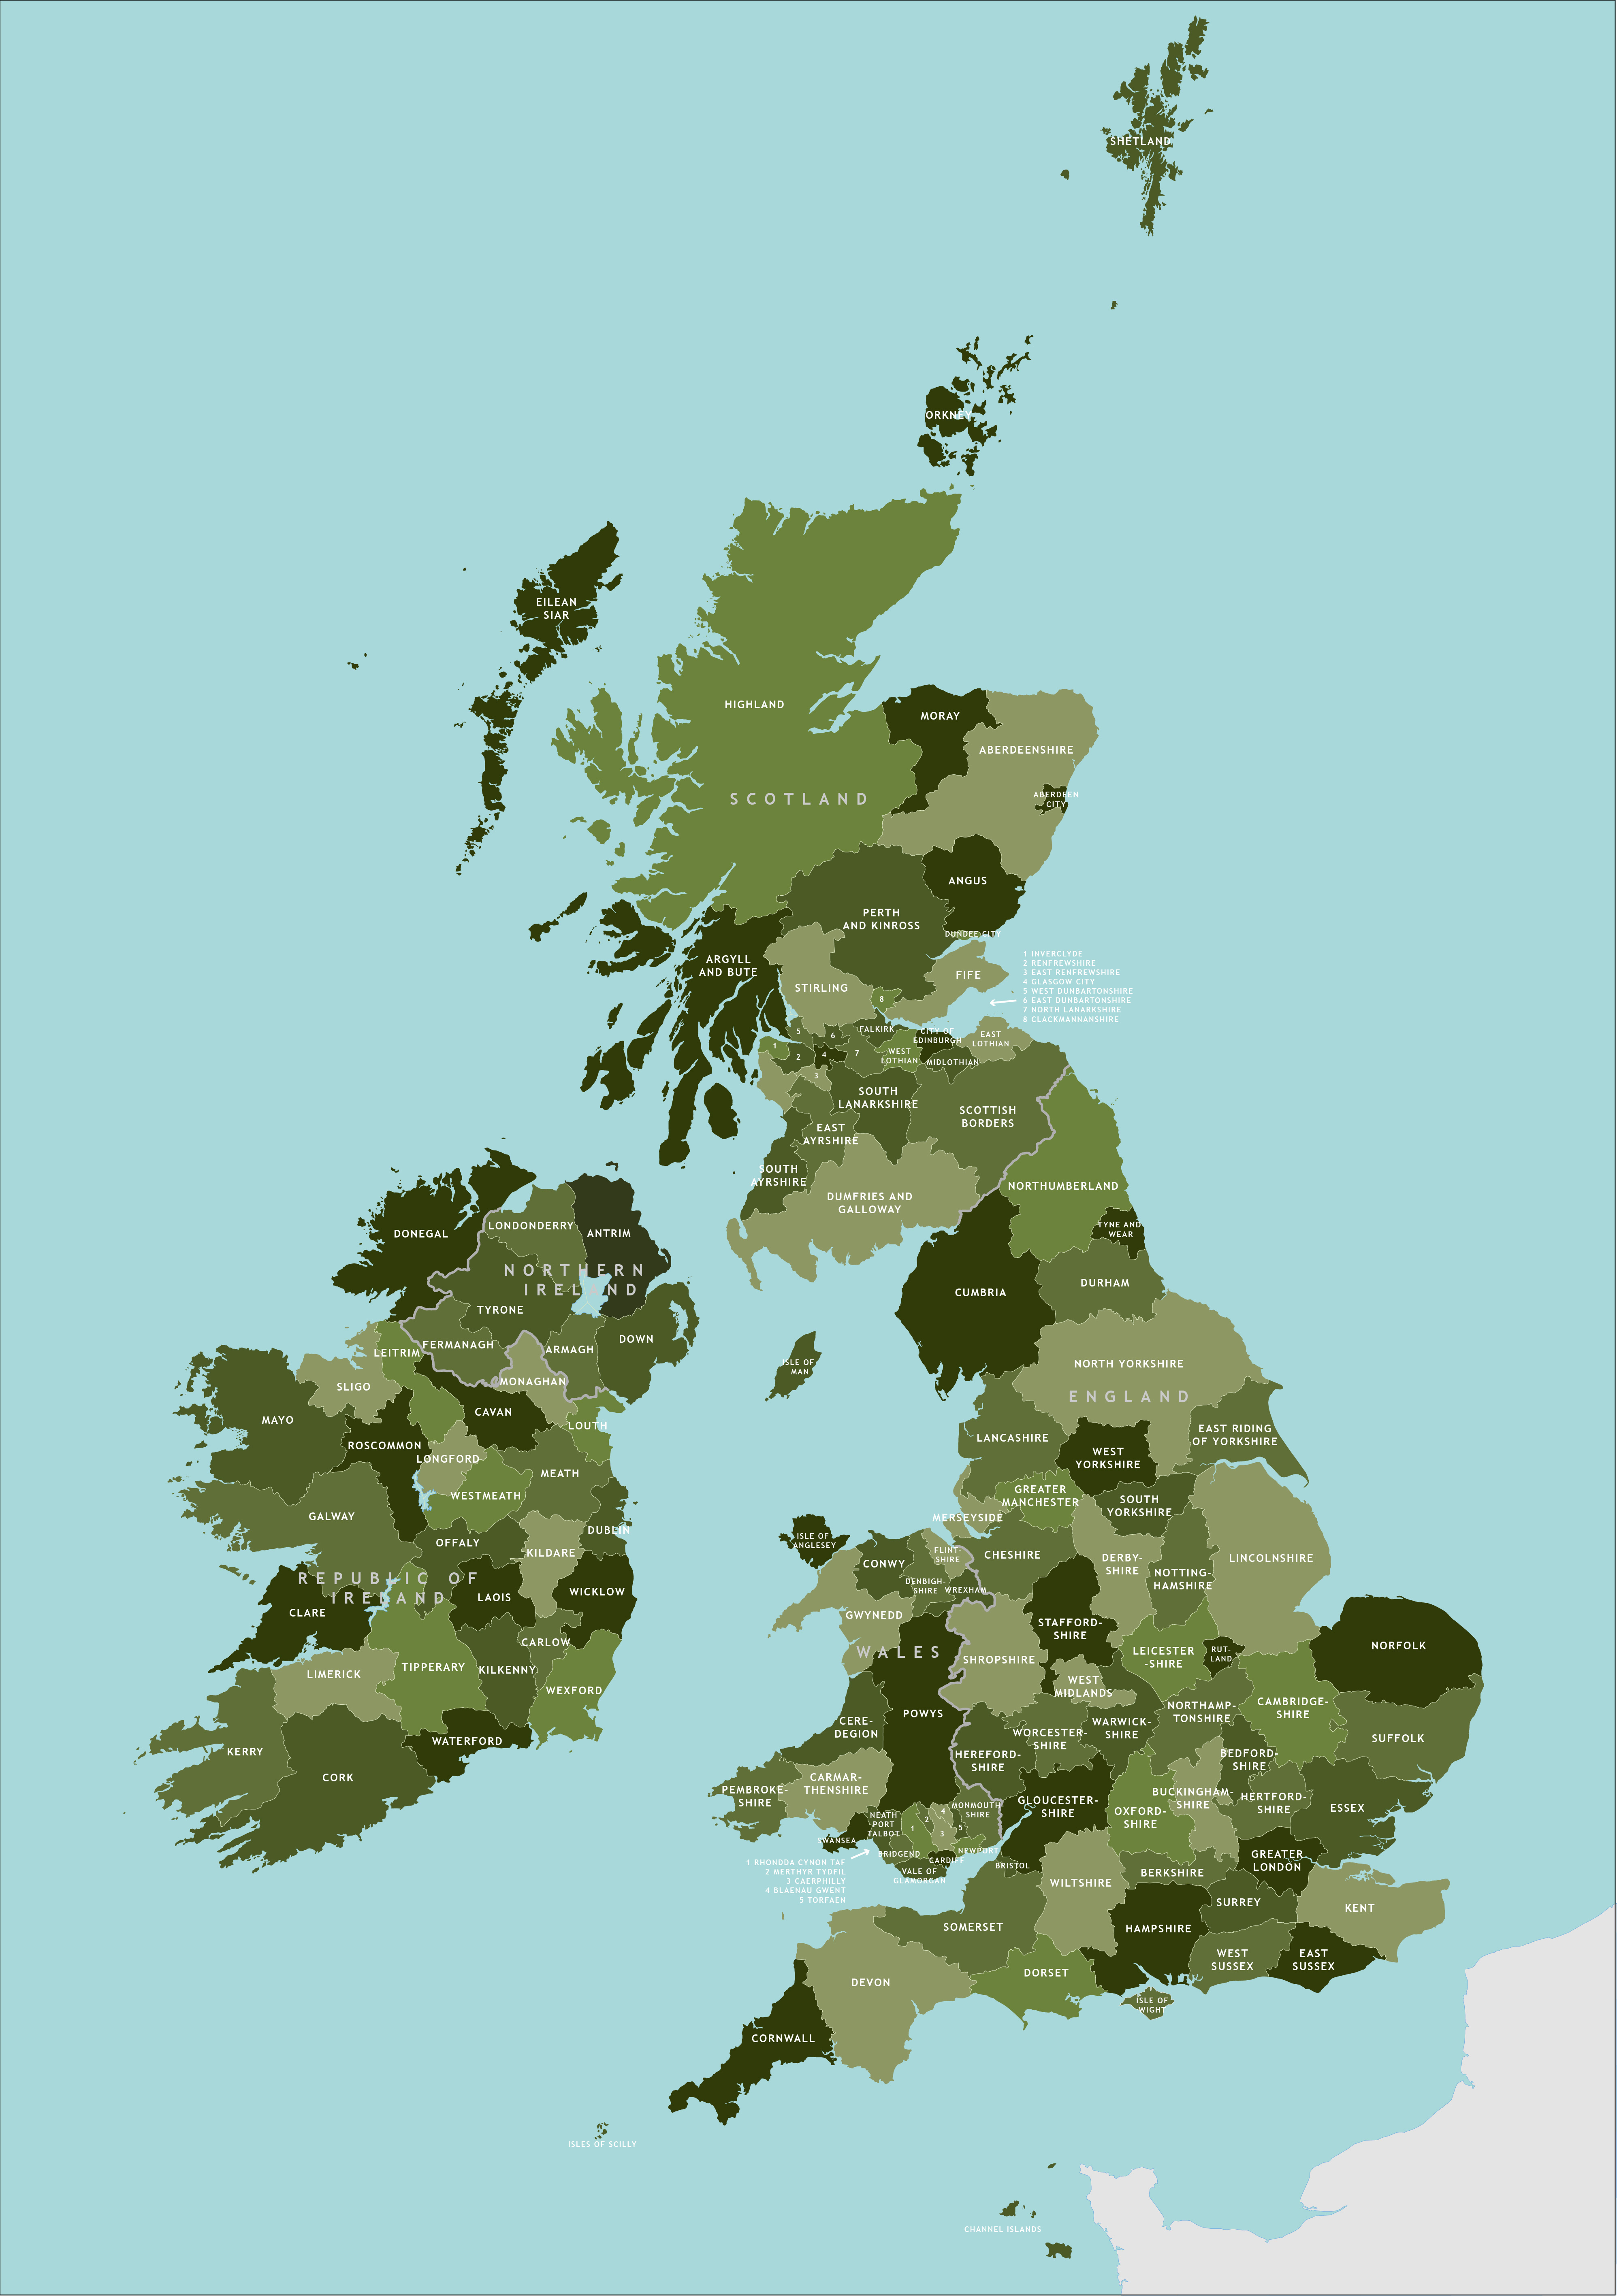 County Map Of Britain And Ireland - Royalty Free Vector Map - Maproom - Free Printable Map Of Uk And Ireland